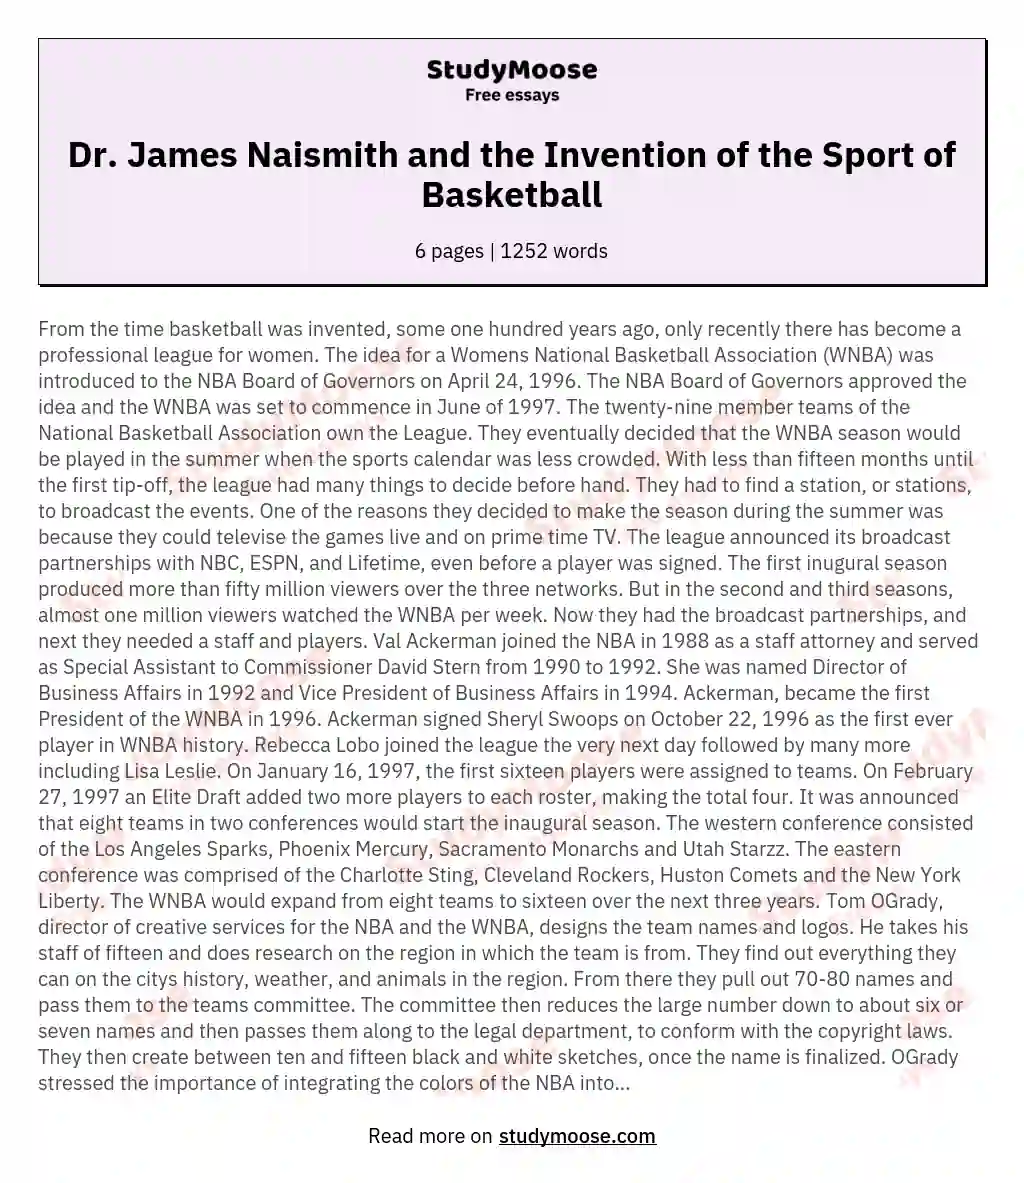 Dr. James Naismith and the Invention of the Sport of Basketball essay